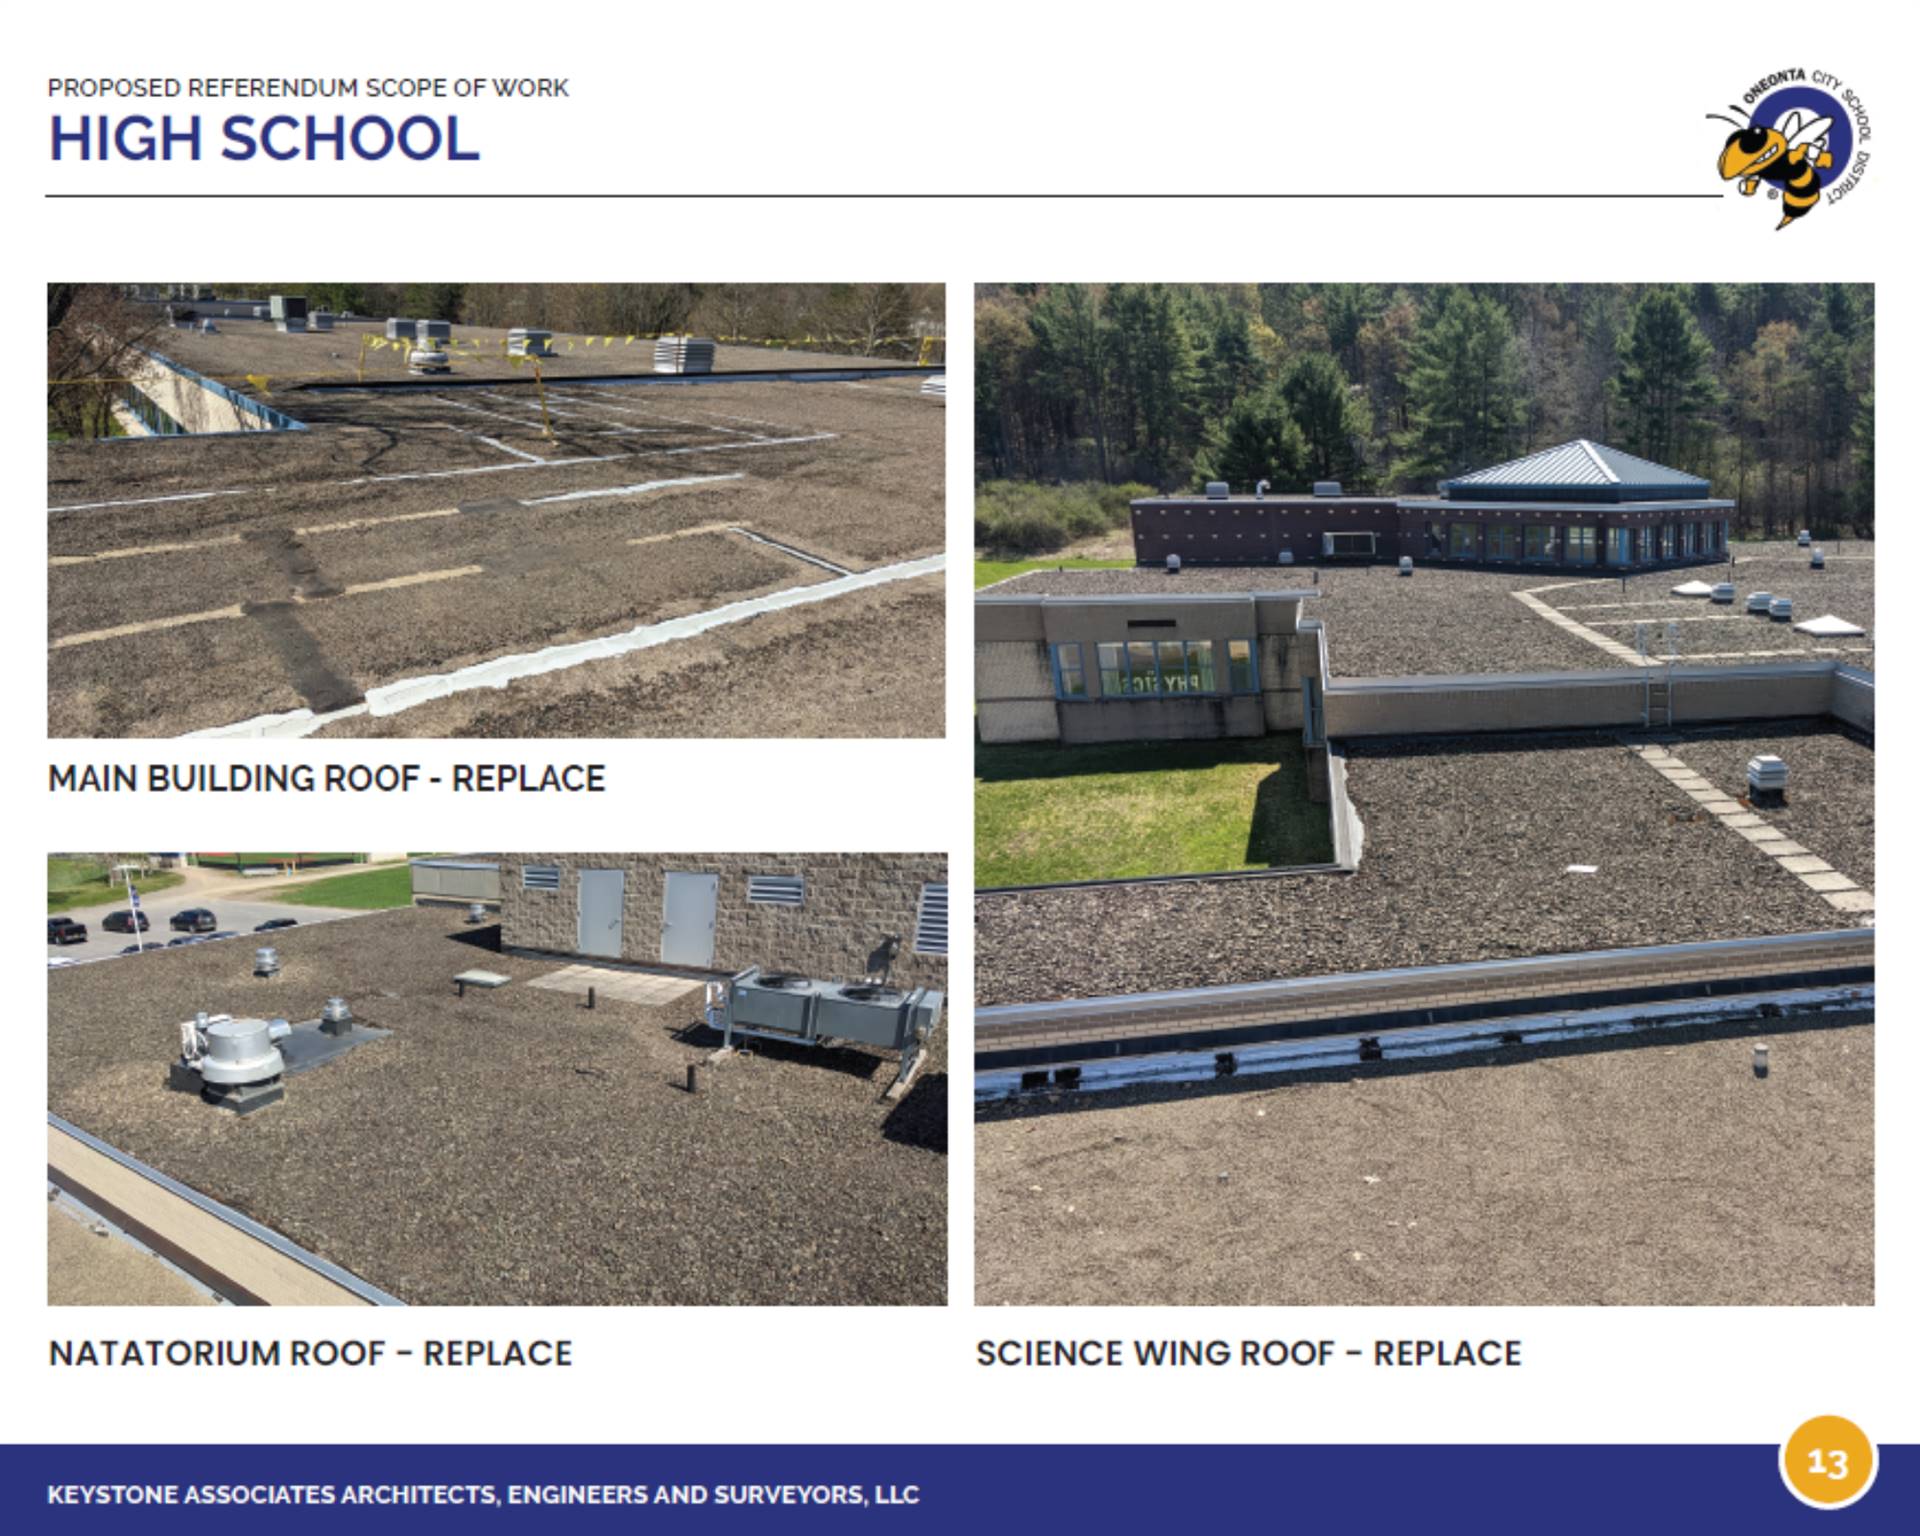 Photo of the Oneonta High School roof.